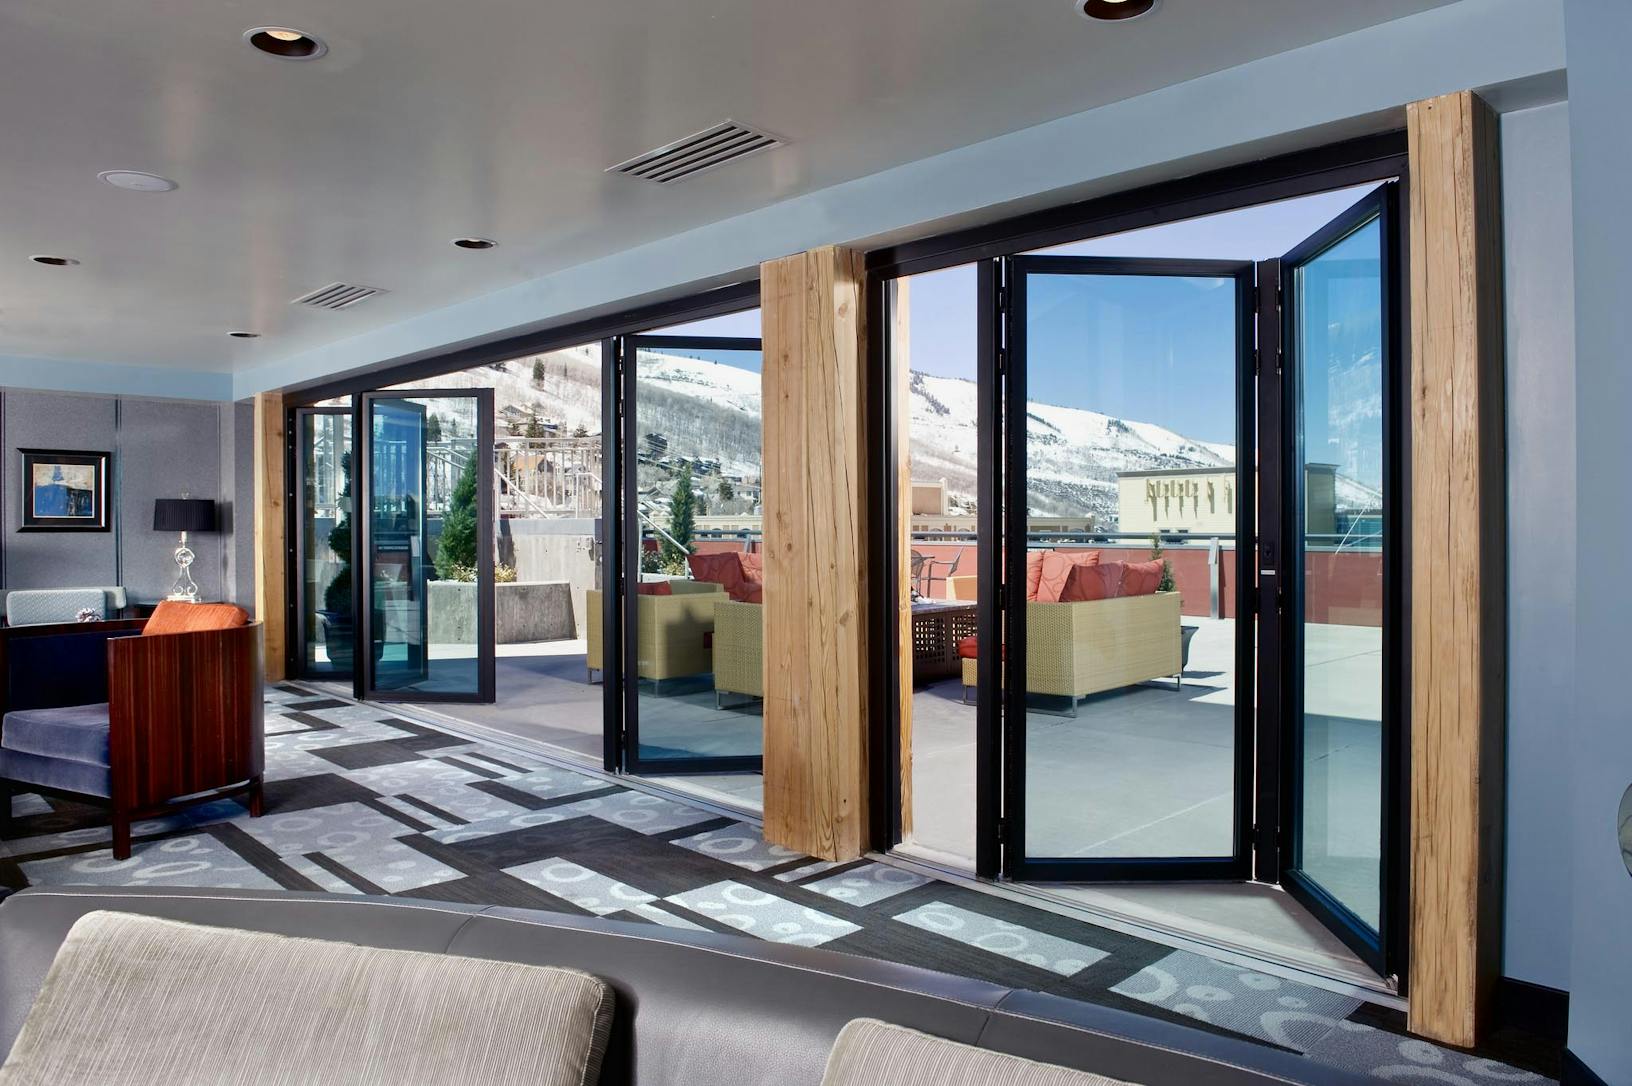 SL70 large opening glass walls at a sky lodge in Park City, UT